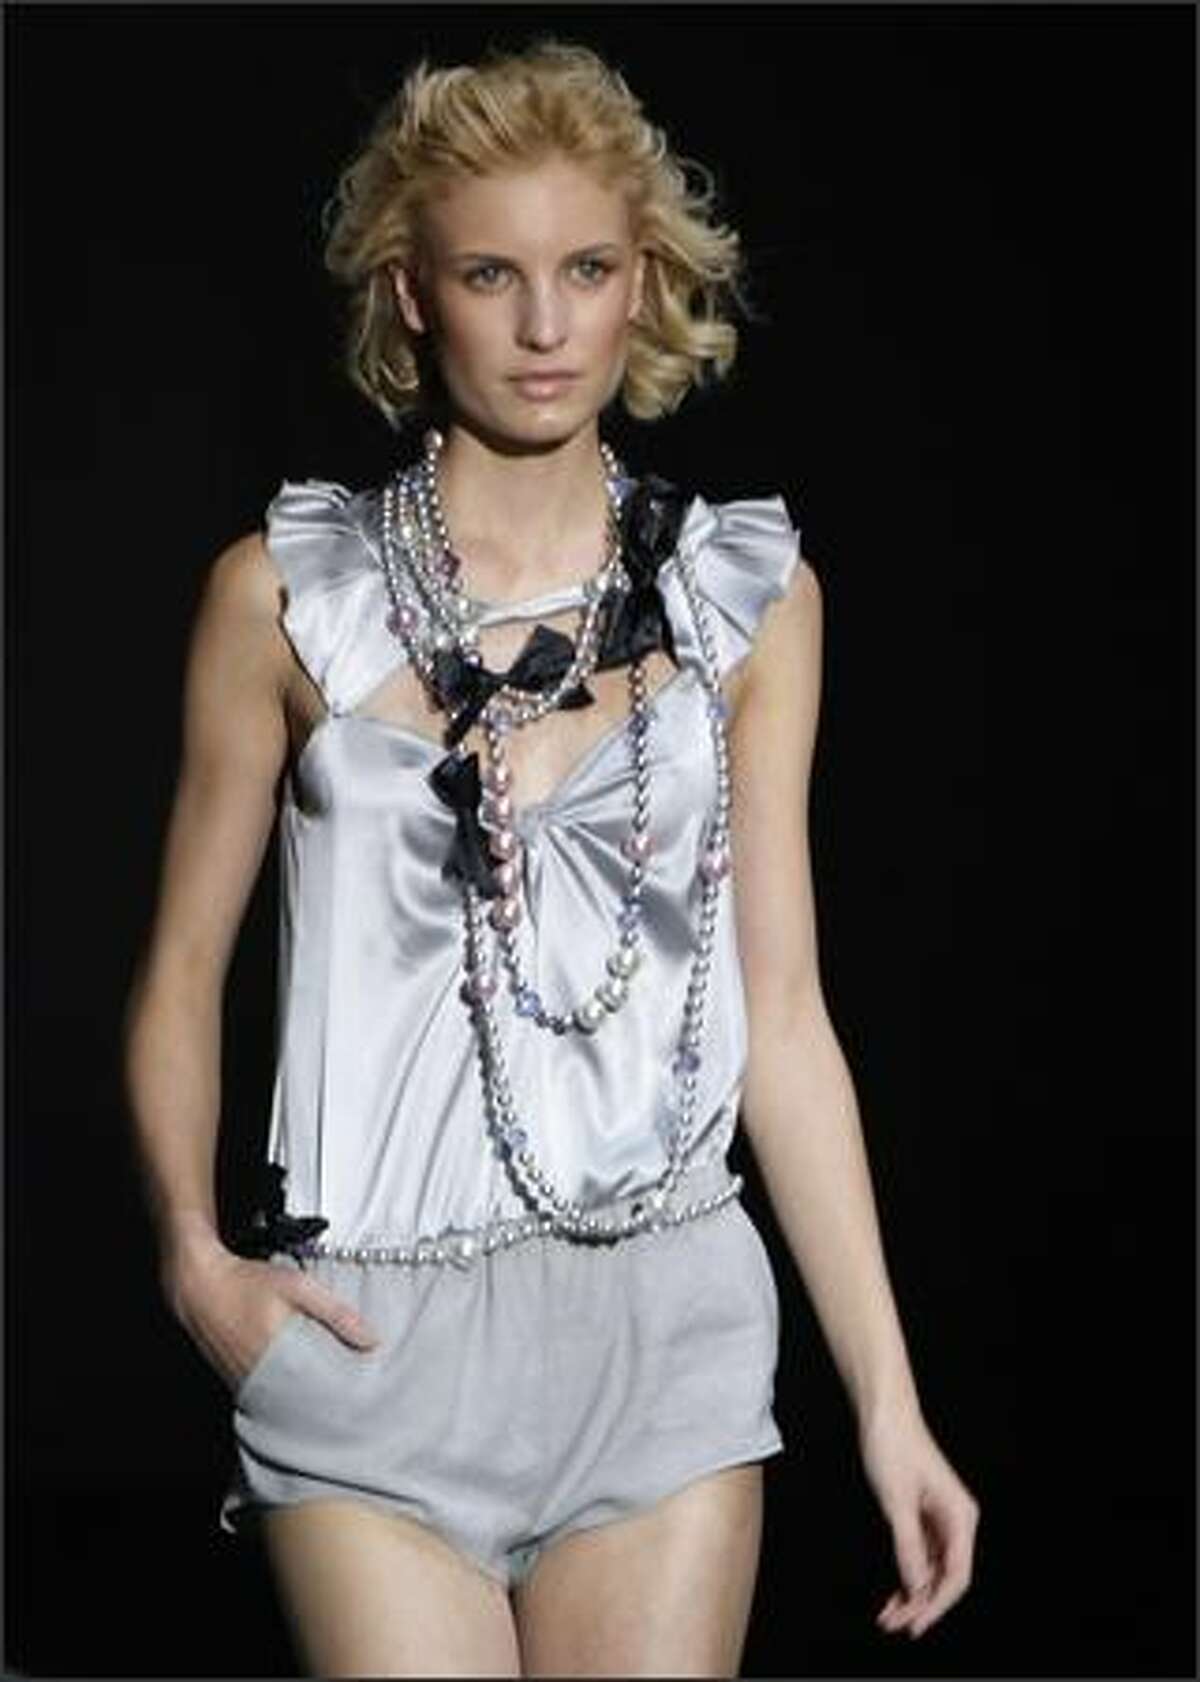 A model presents a creation by Italian designer Giorgio Armani for Emporio Armani during the Spring/Summer 2008 collections of the Milan ready-to-wear fashion shows.